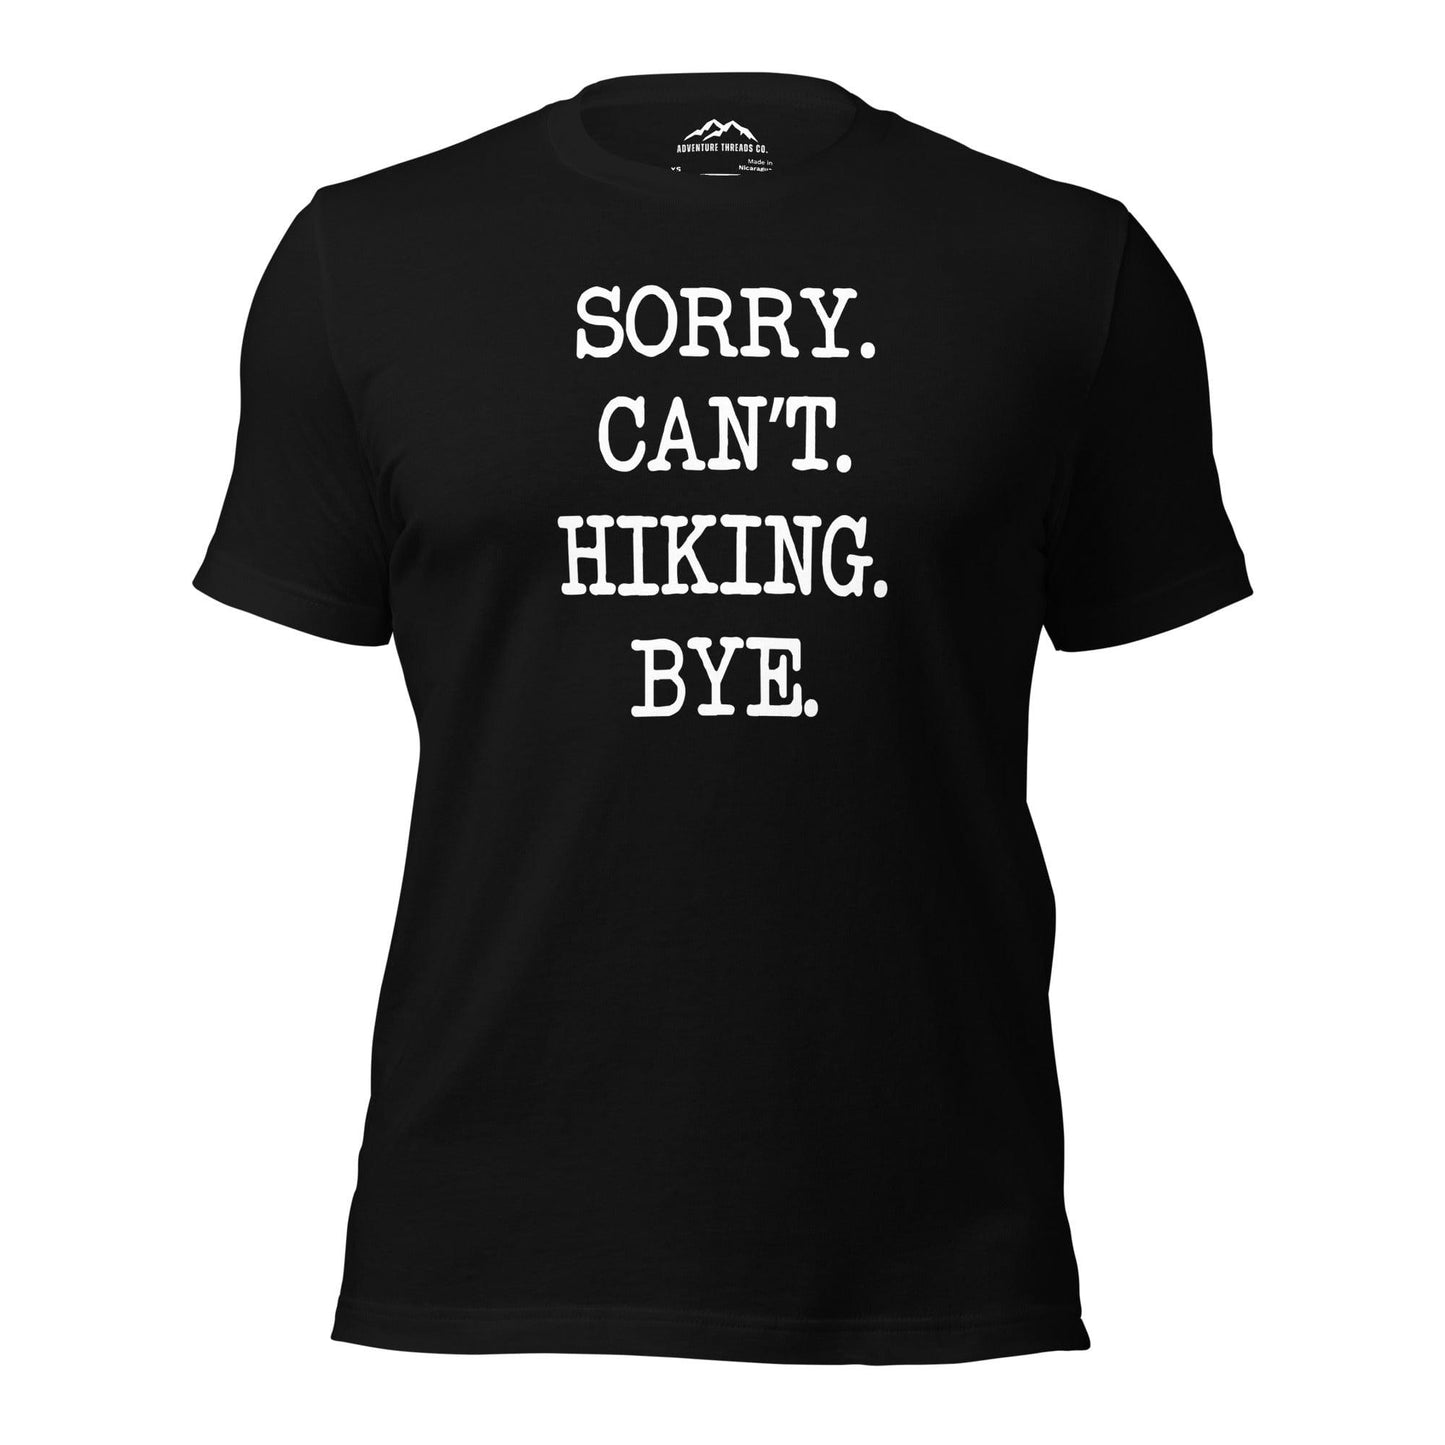 Sorry. Can't. Hiking. Bye. T-Shirt - Adventure Threads Company